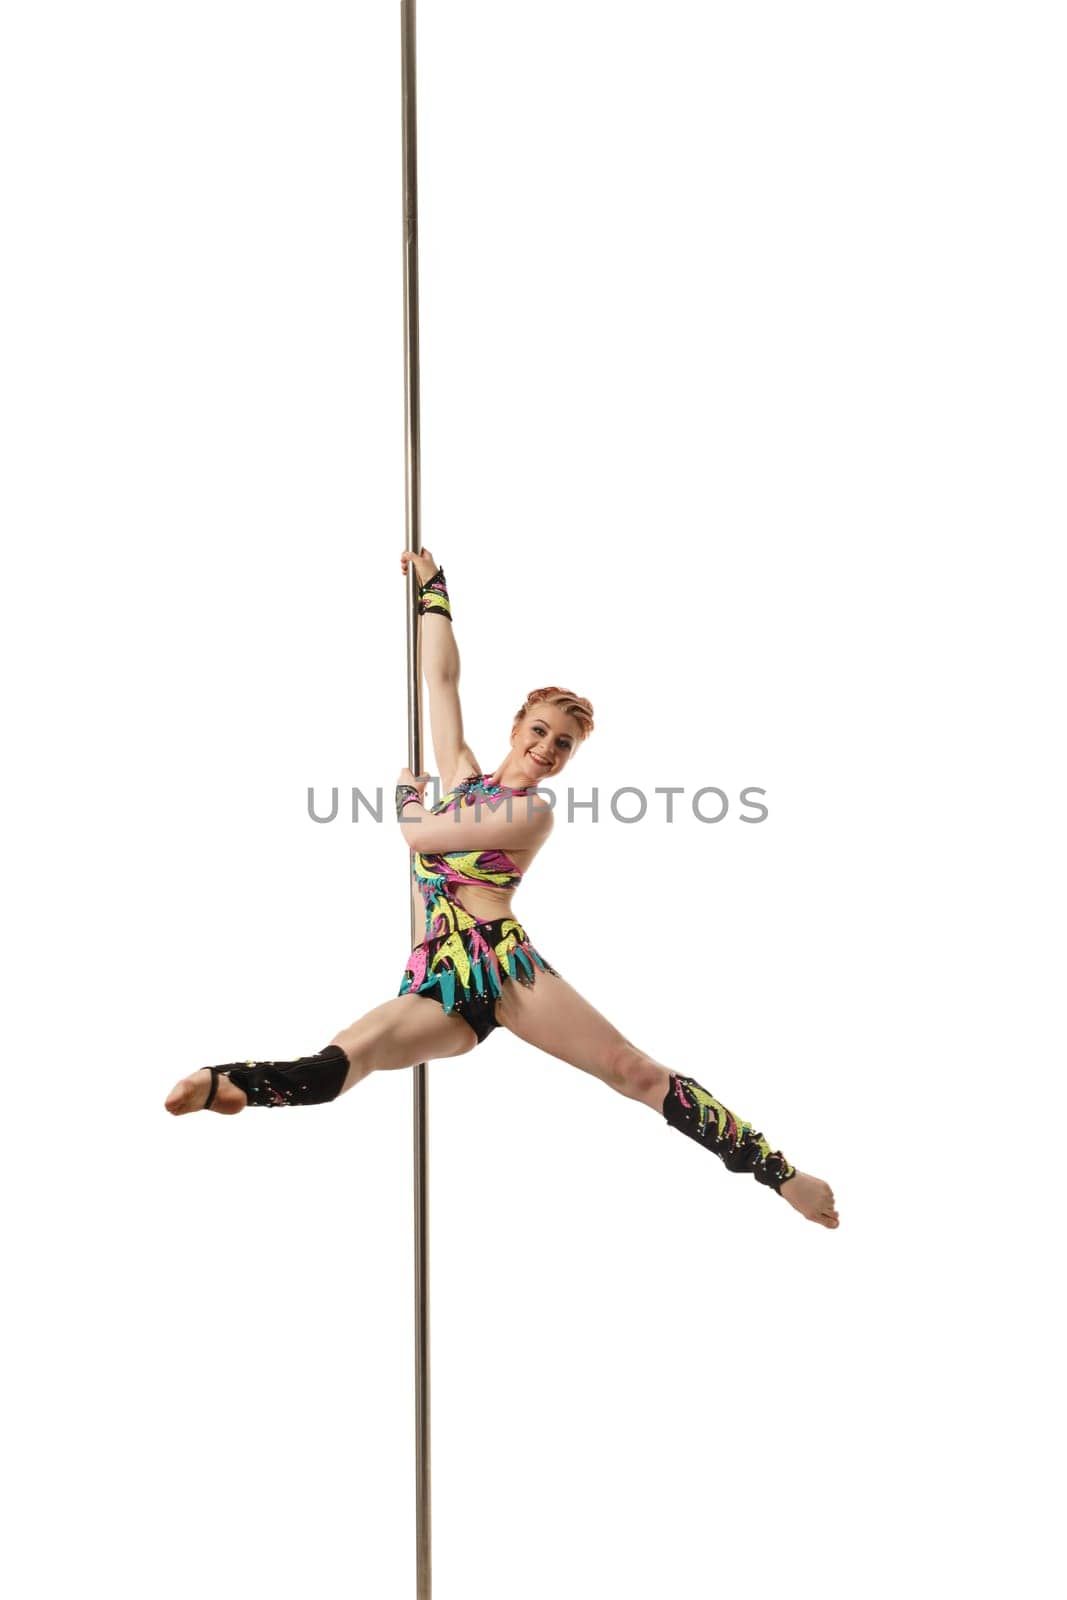 Image of red-haired woman posing while dancing on pylon